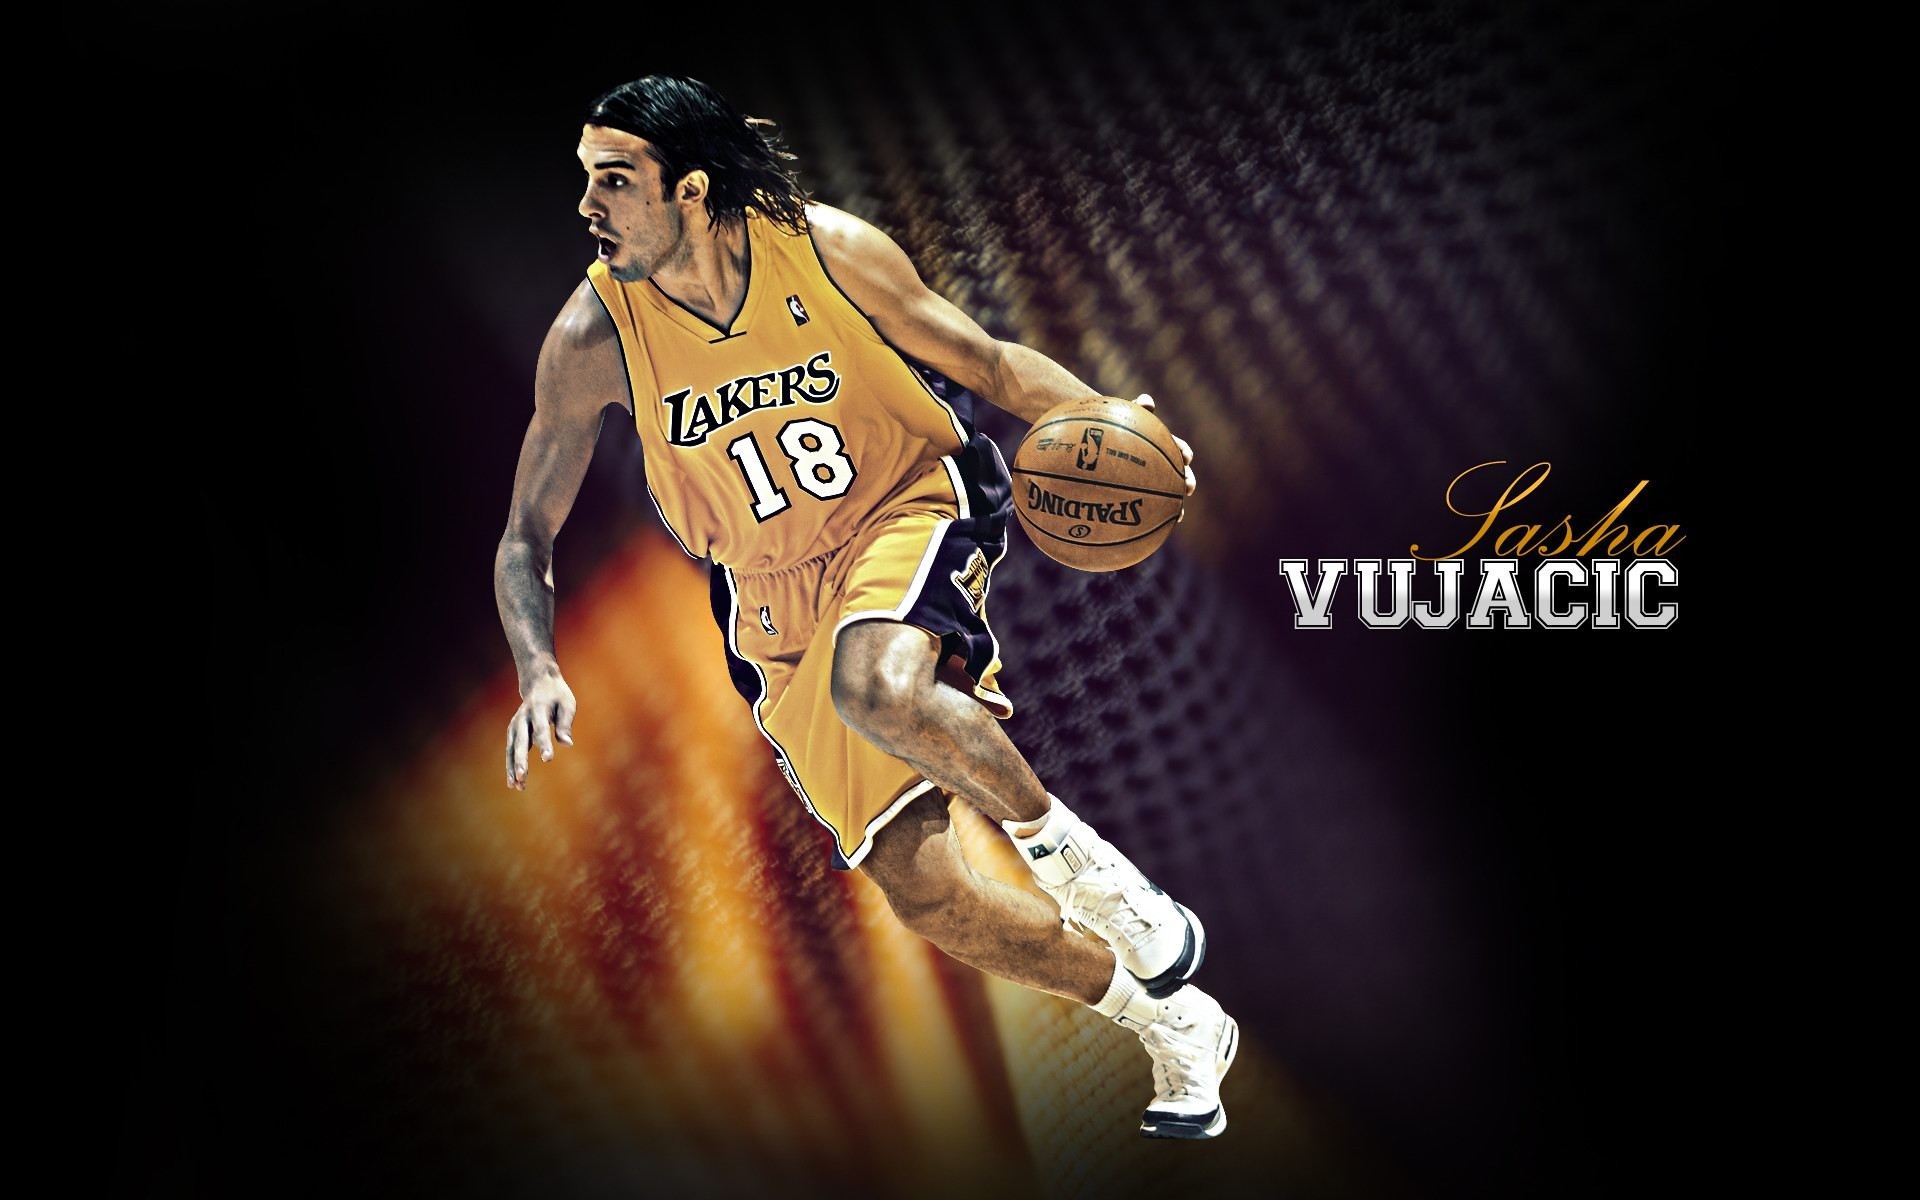 Los Angeles Lakers Official Wallpaper #22 - 1920x1200